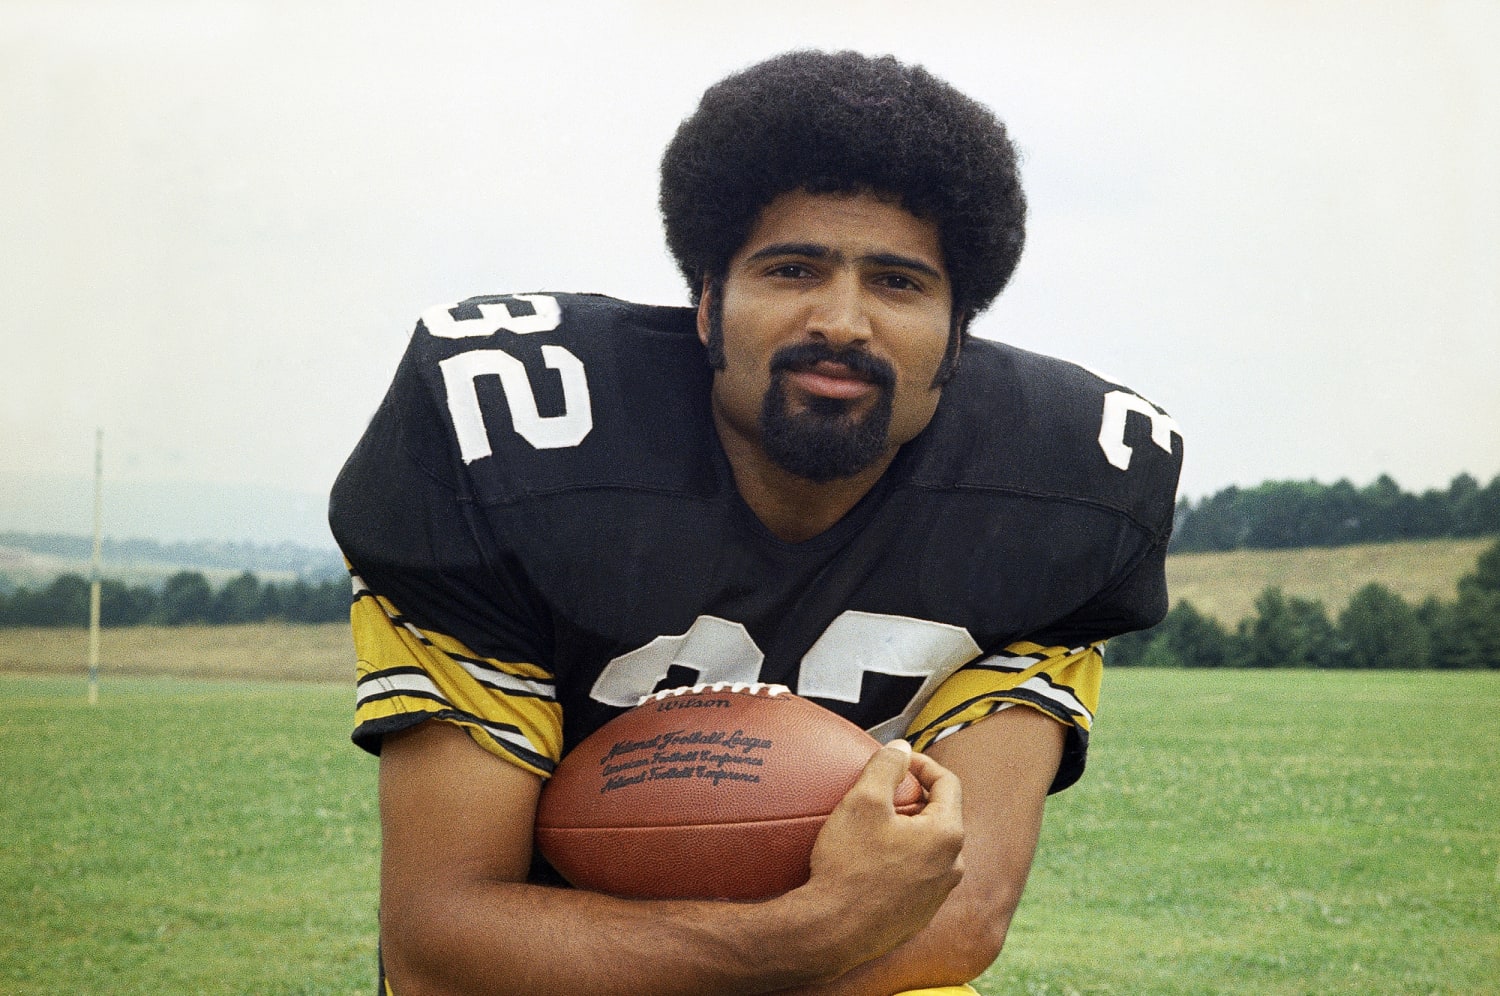 the immaculate reception by franco harris